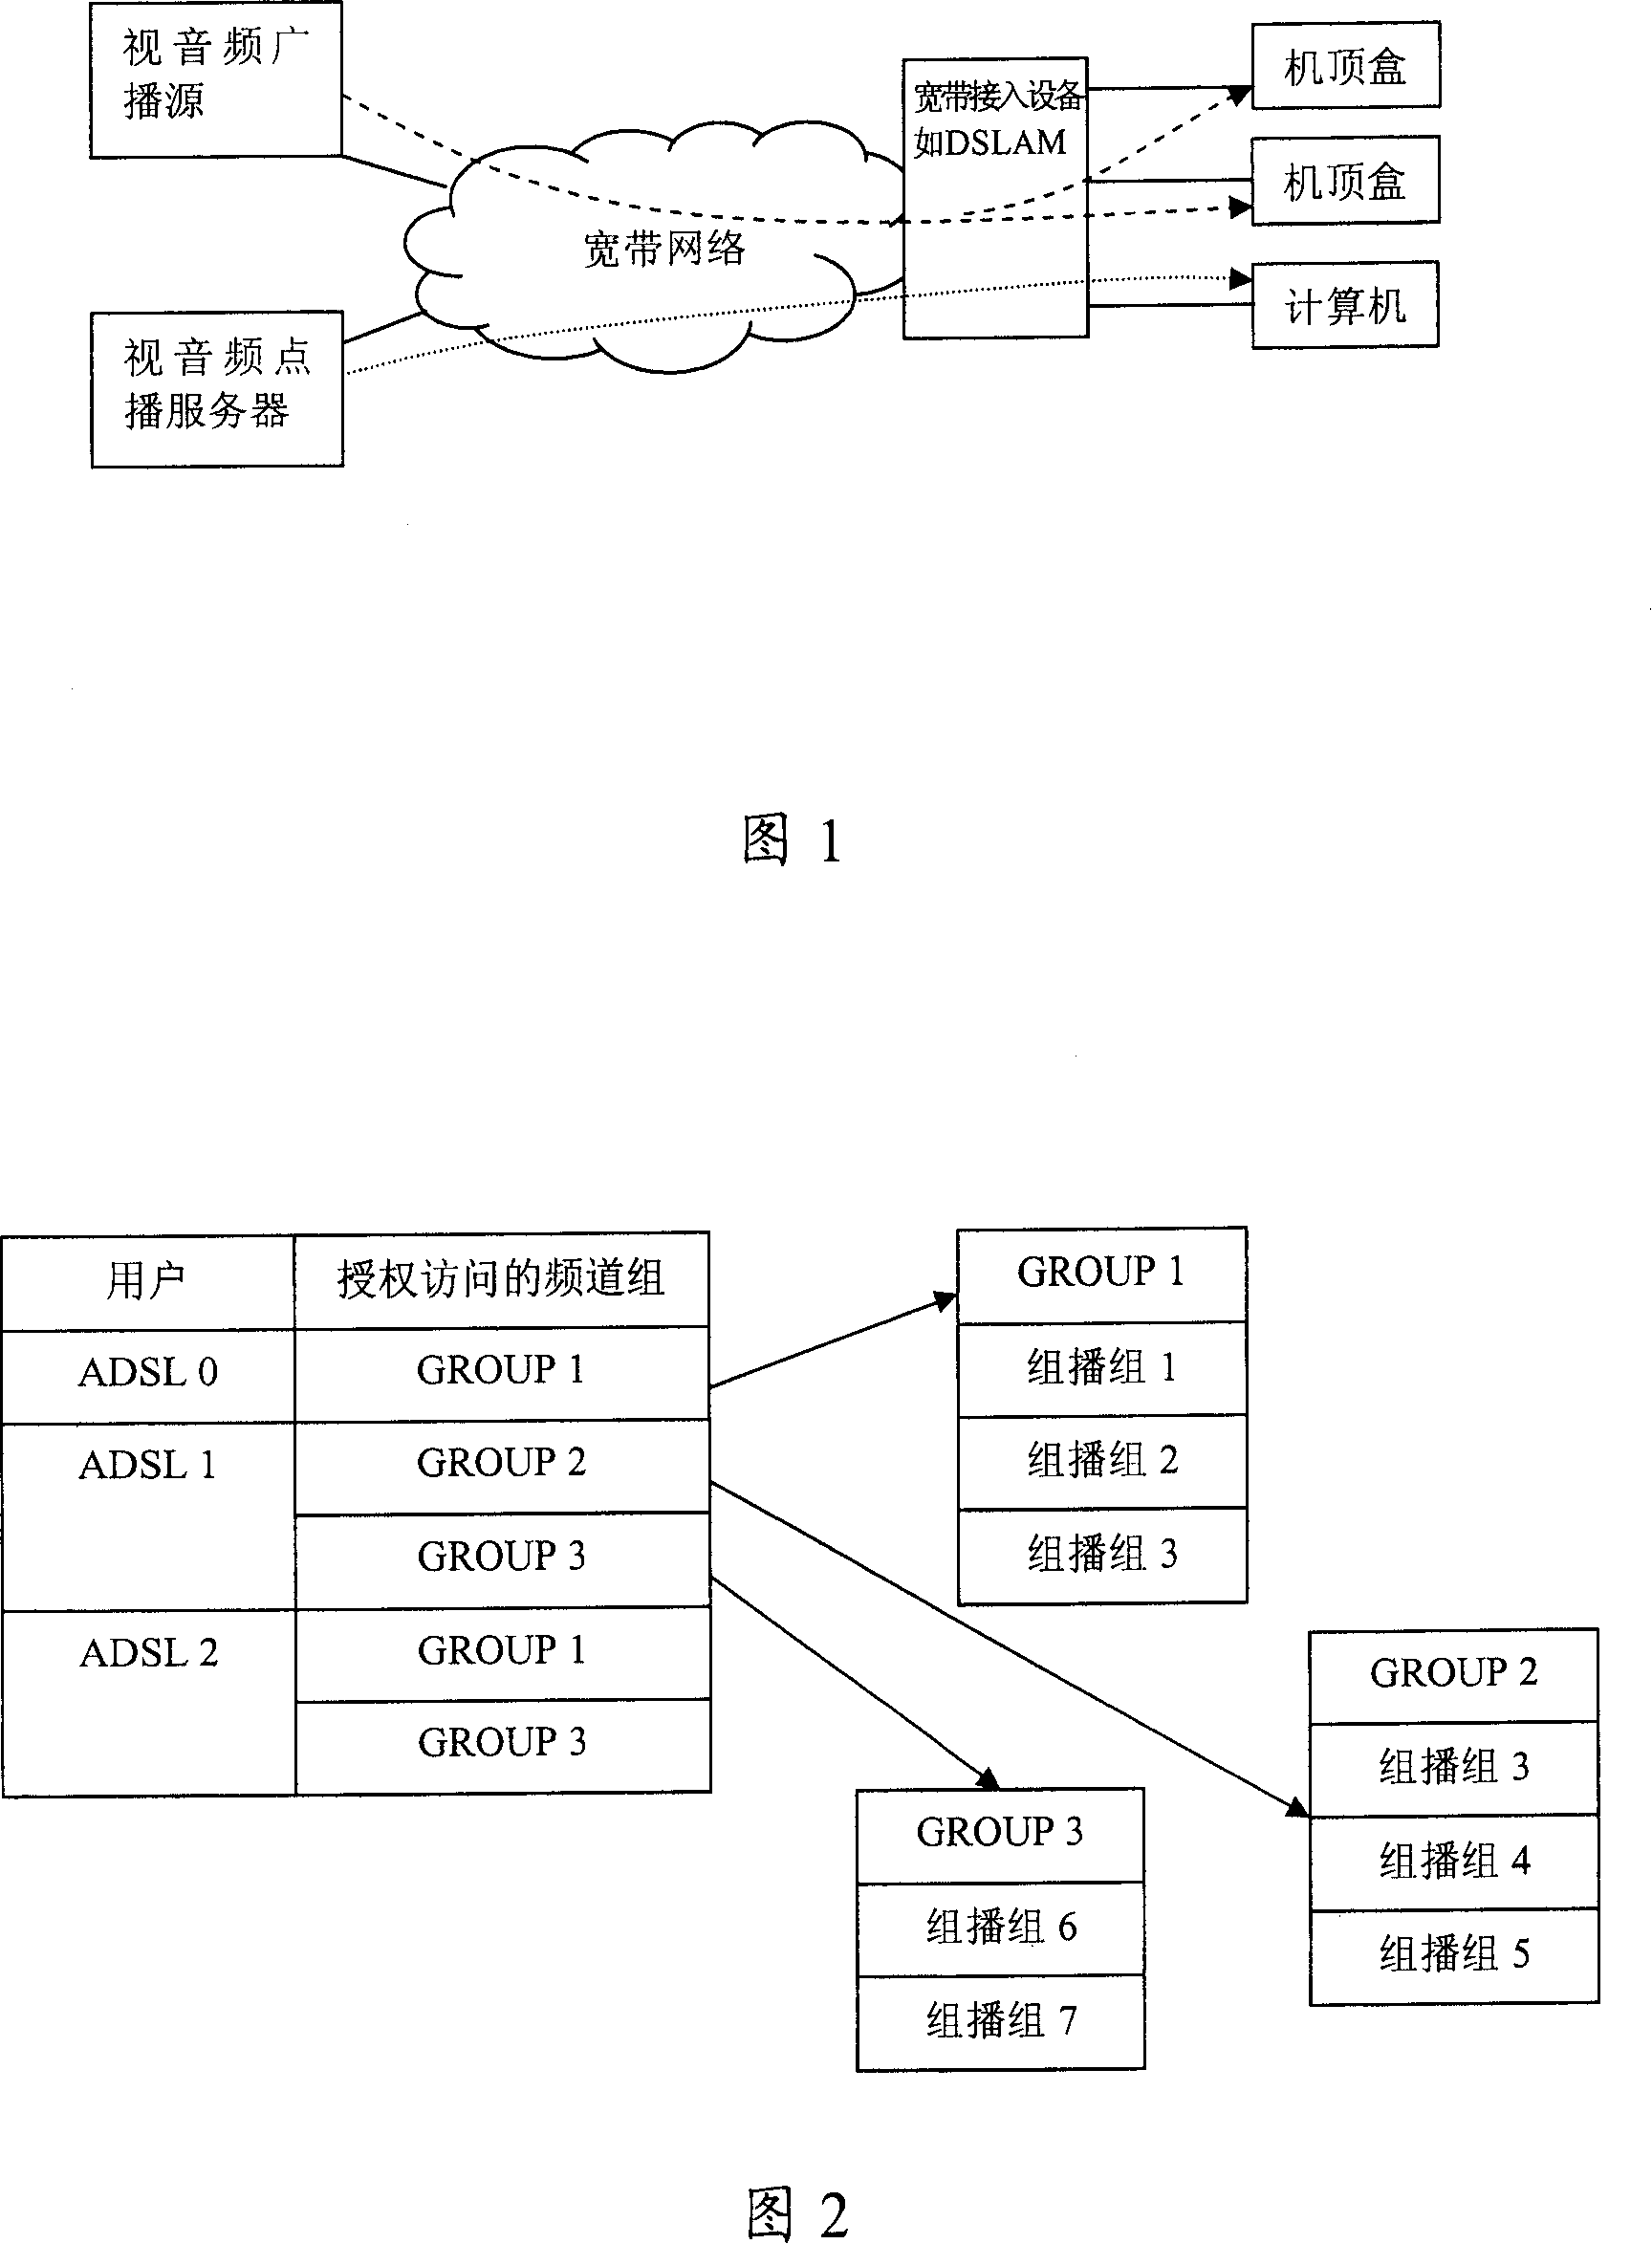 Method for protecting broadband video-audio broadcasting content